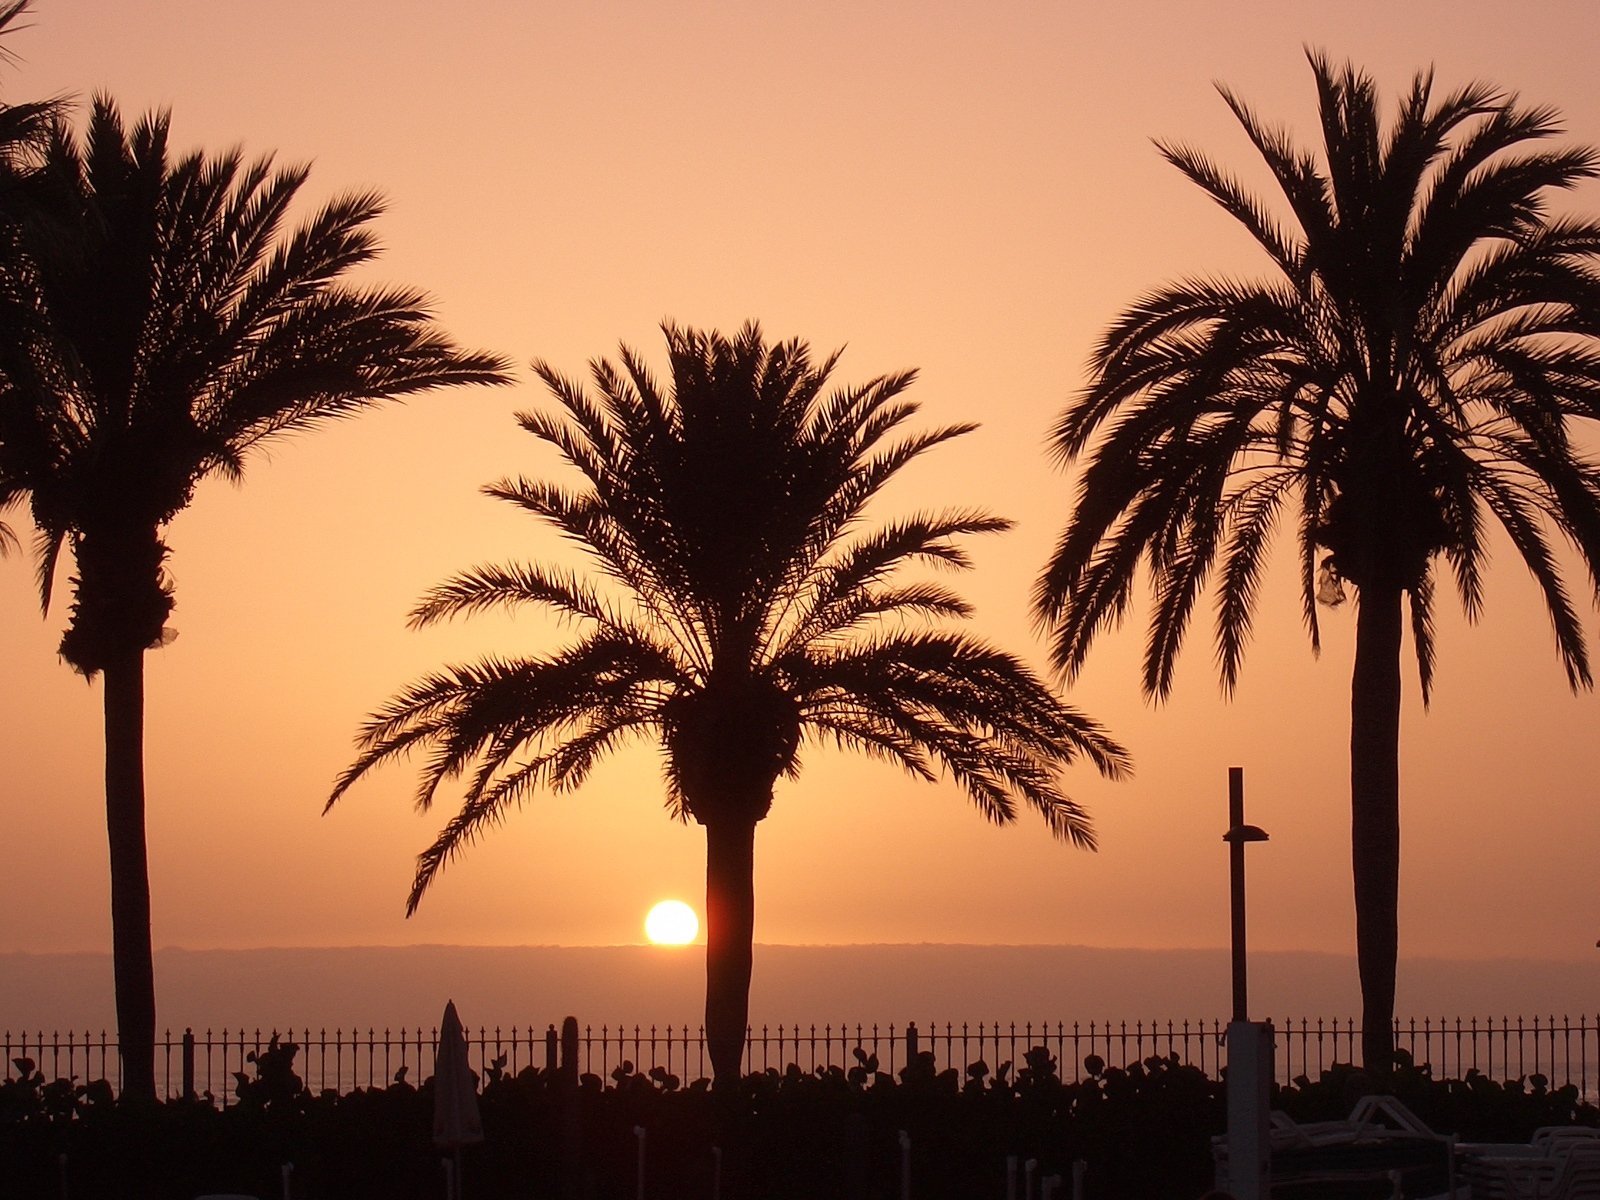 silhouettes of palm trees and the sun in the background